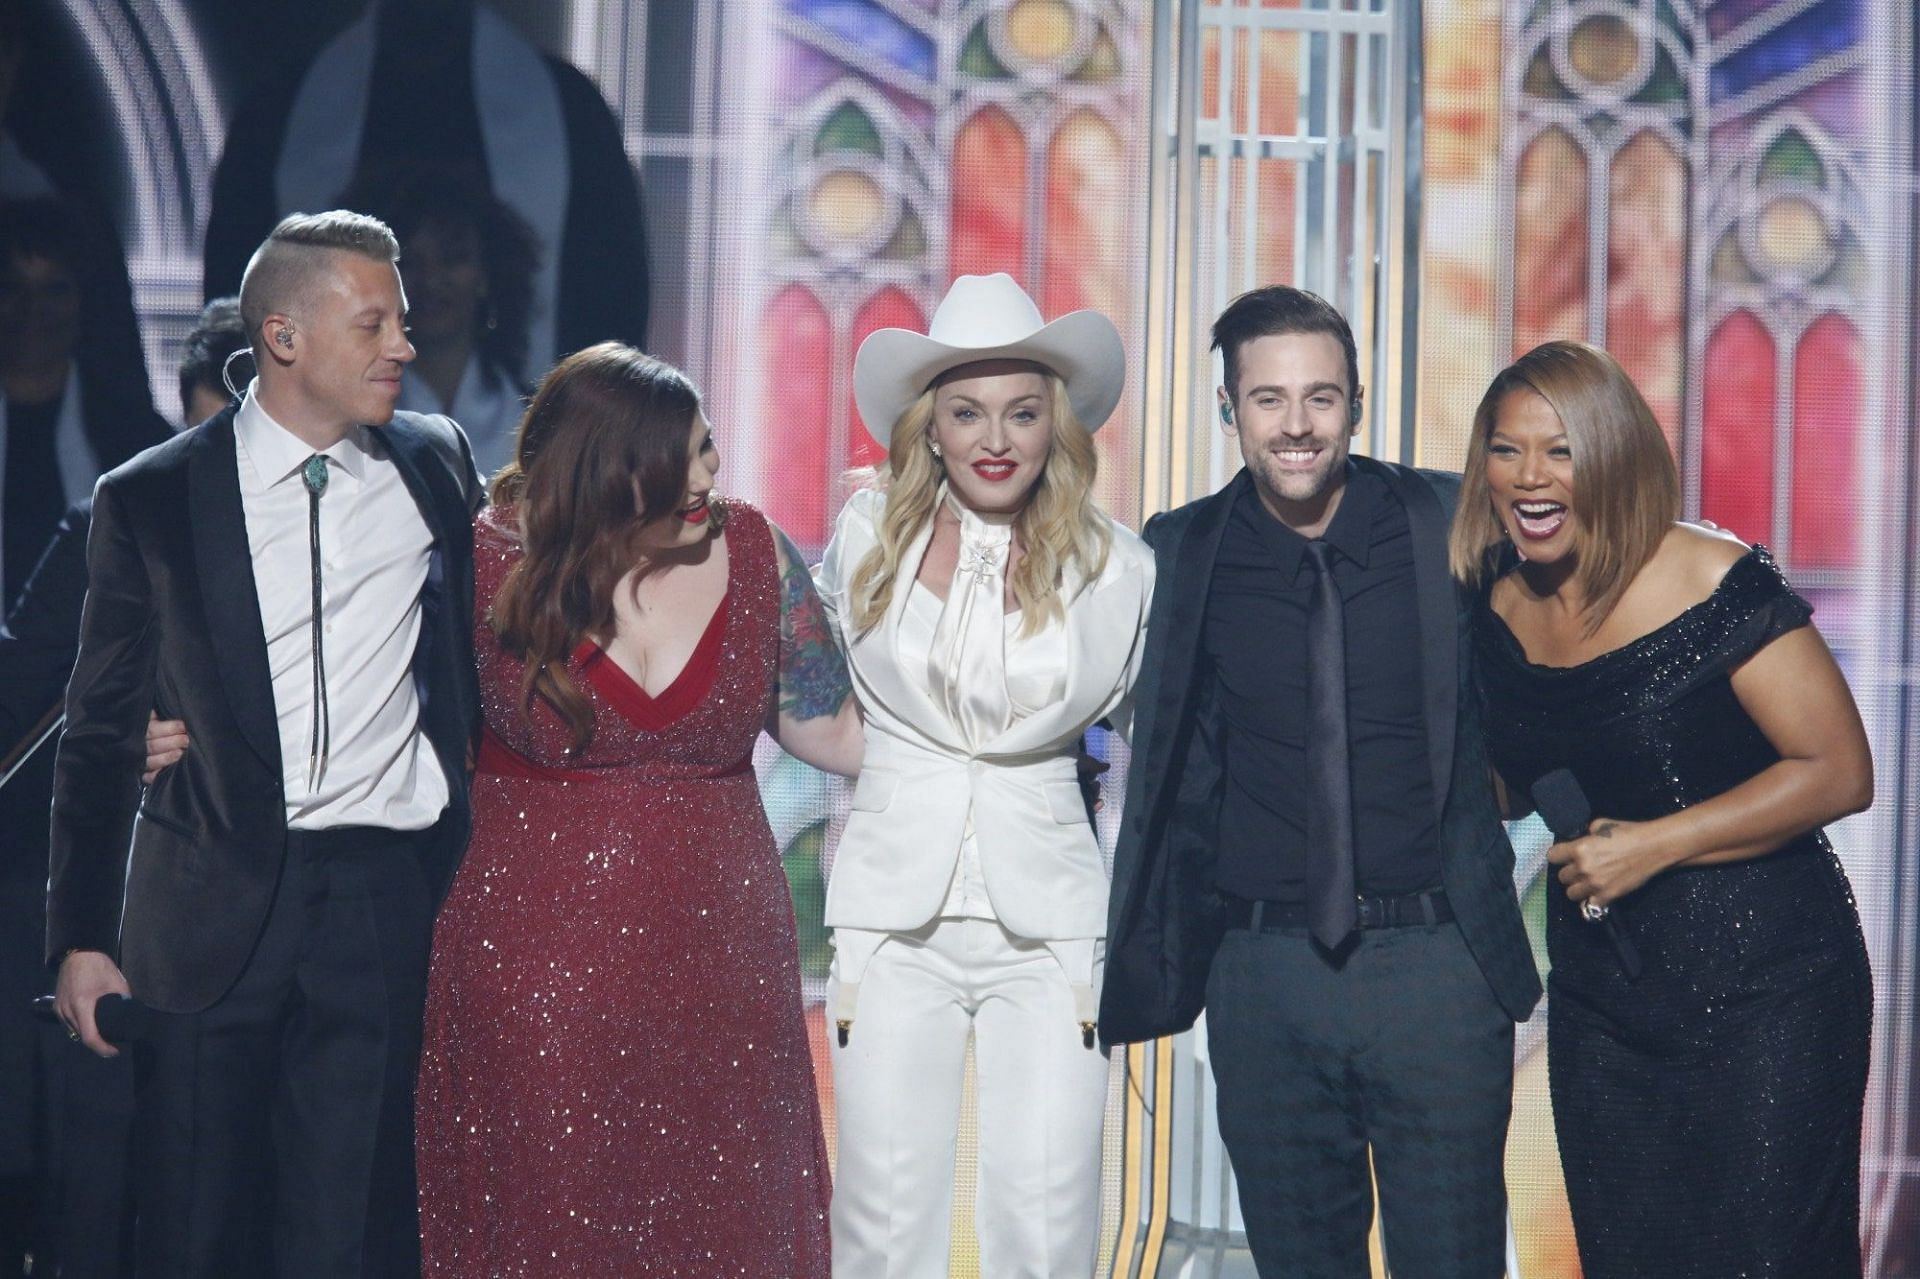 Macklemore, Mary Lamber, Madonna, Ryan Lewis, and Queen Latifah after the performance and nuptials (Image via CBS Archive)